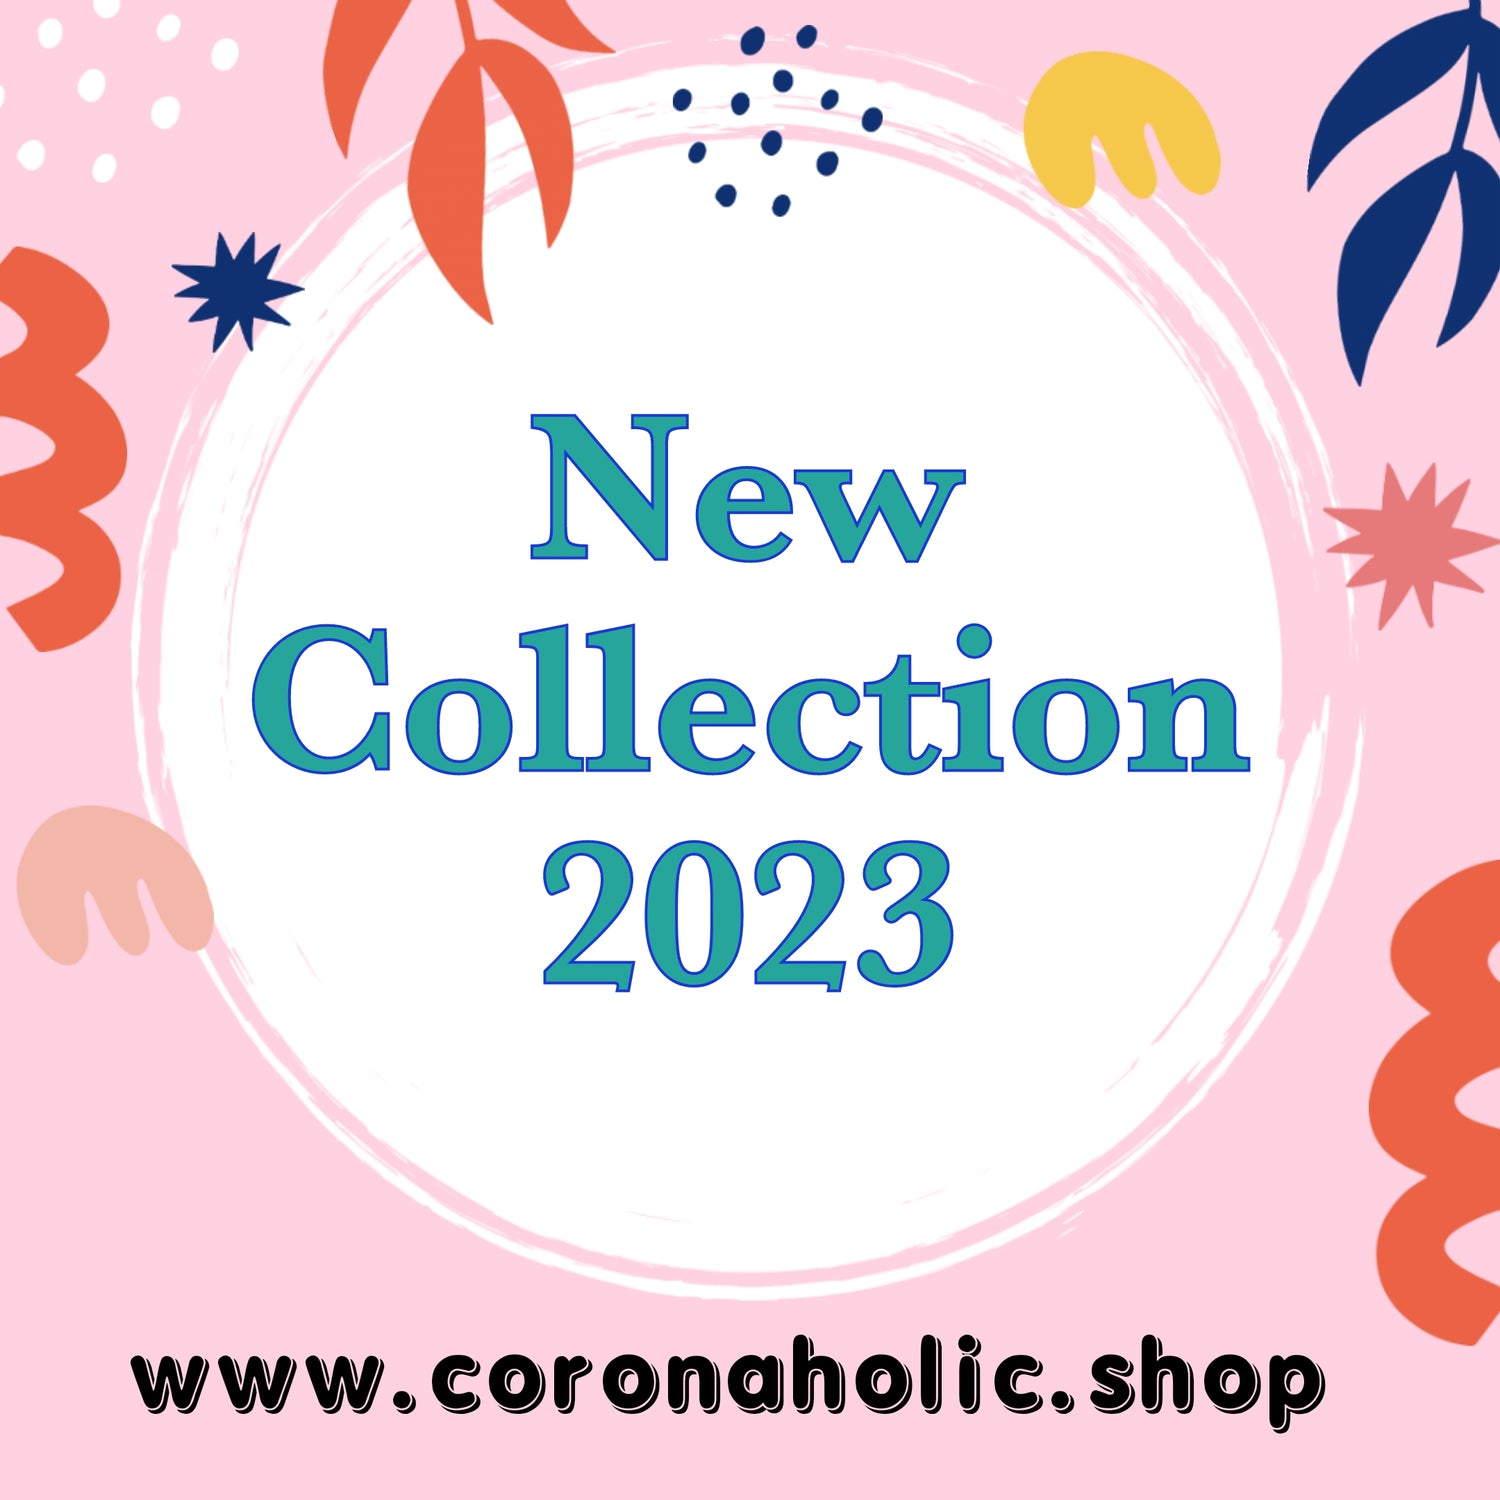 "COLLECTION 2023"